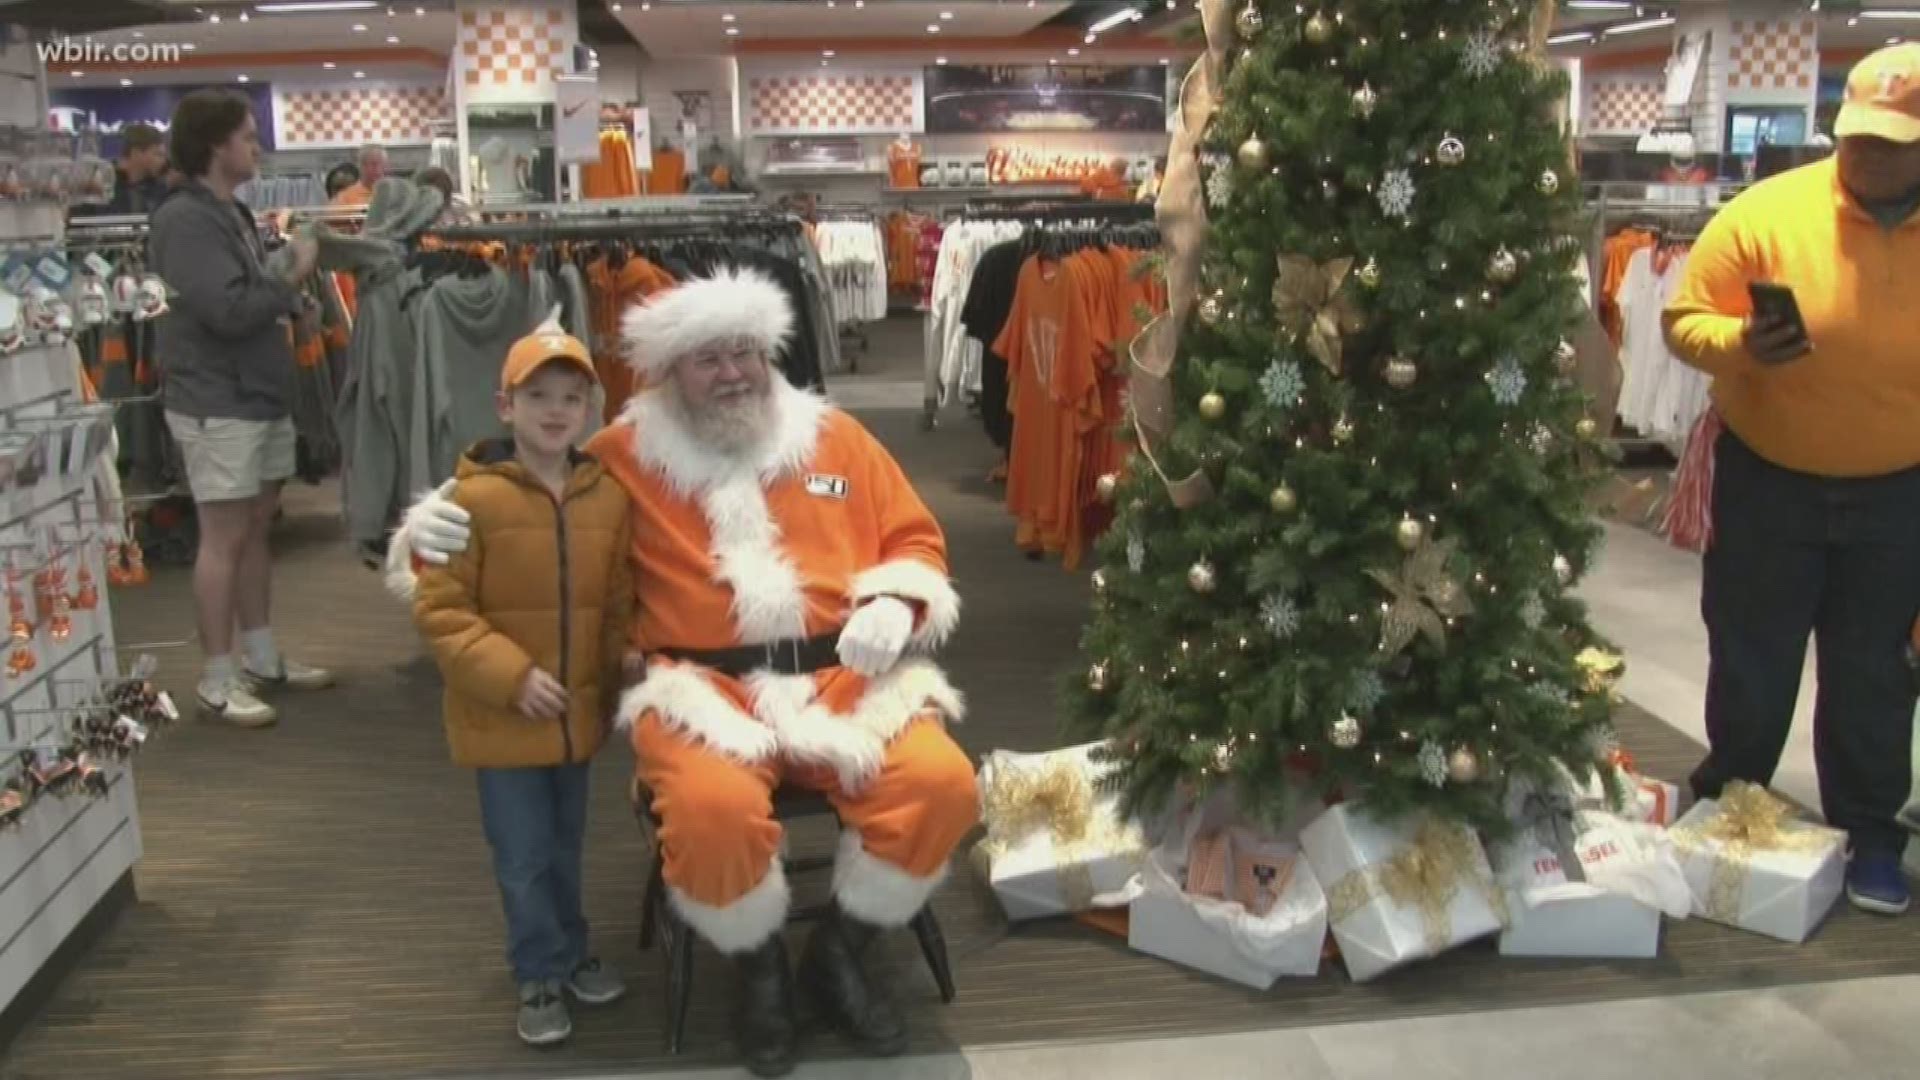 Santa Vol, cousin of Claus, has been watching! He made an appearance at the Student Union VolShop -- just before UT took on Vandy.